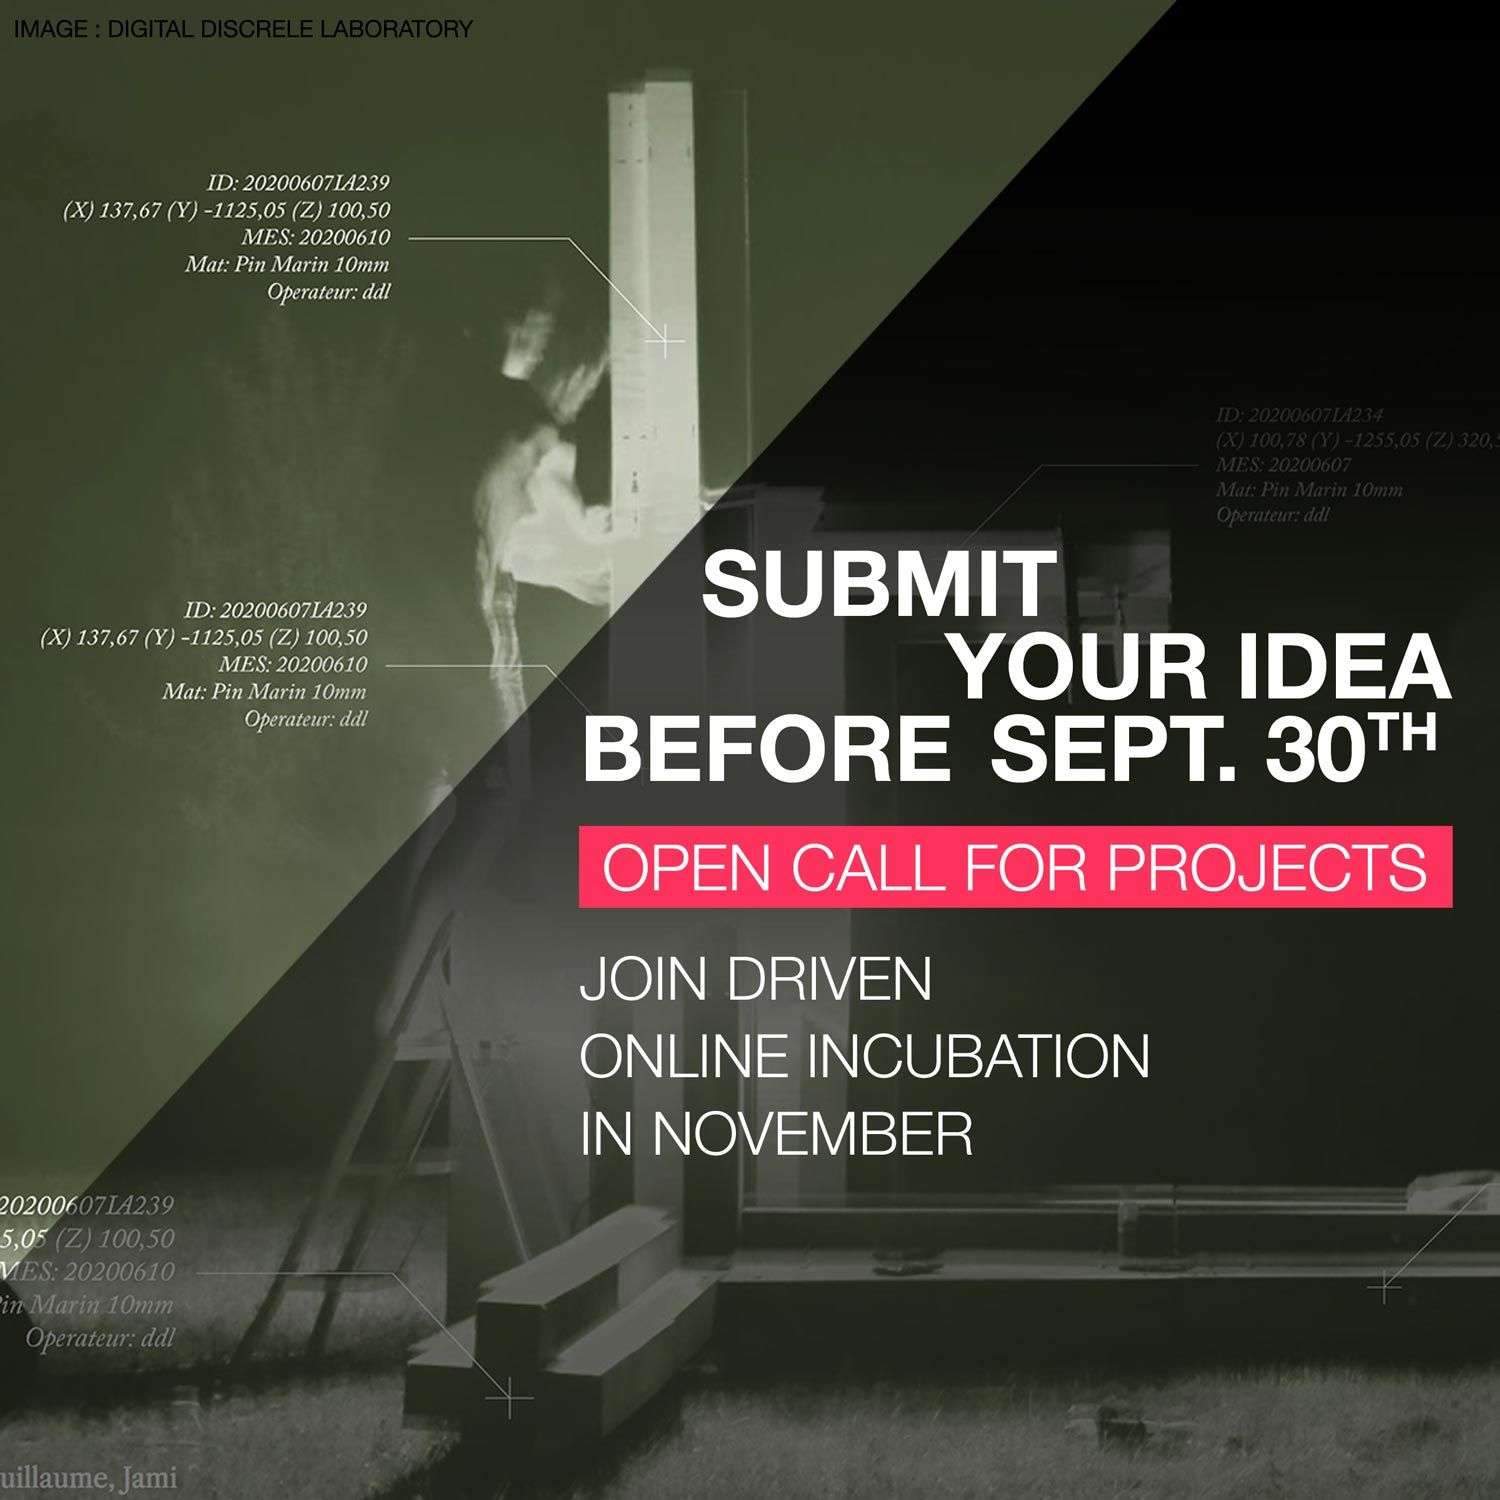 DRIVEN Incubation Program Call for Projects